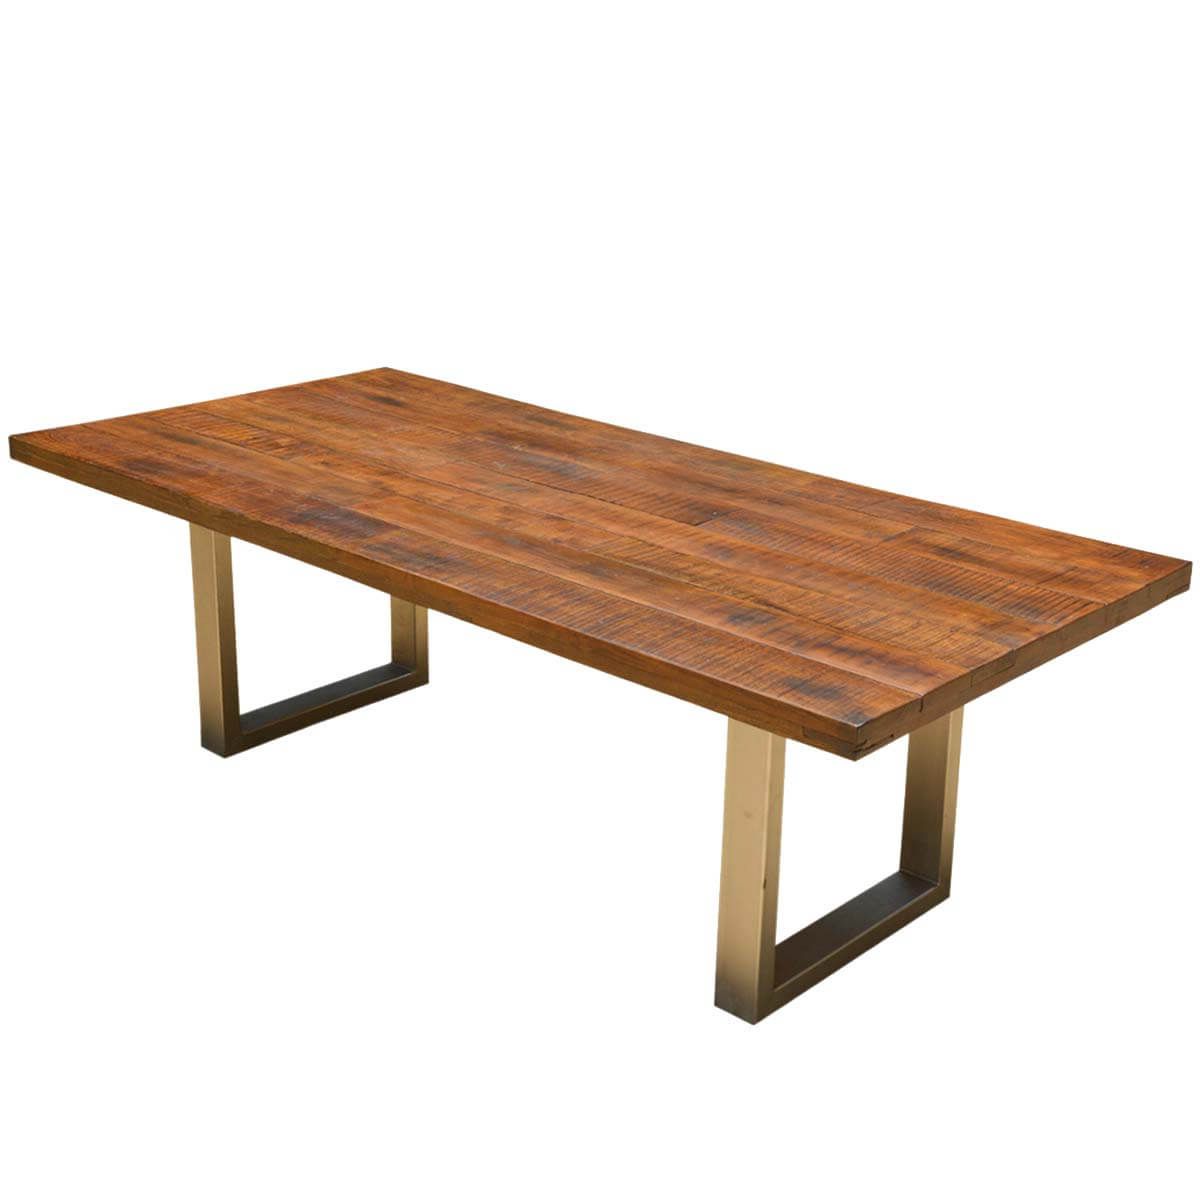 Unique Acacia Wood Dining Tables In 2017 Acacia Lyon Large Contemporary Rustic Solid Acacia Wood Dining Table (View 11 of 30)